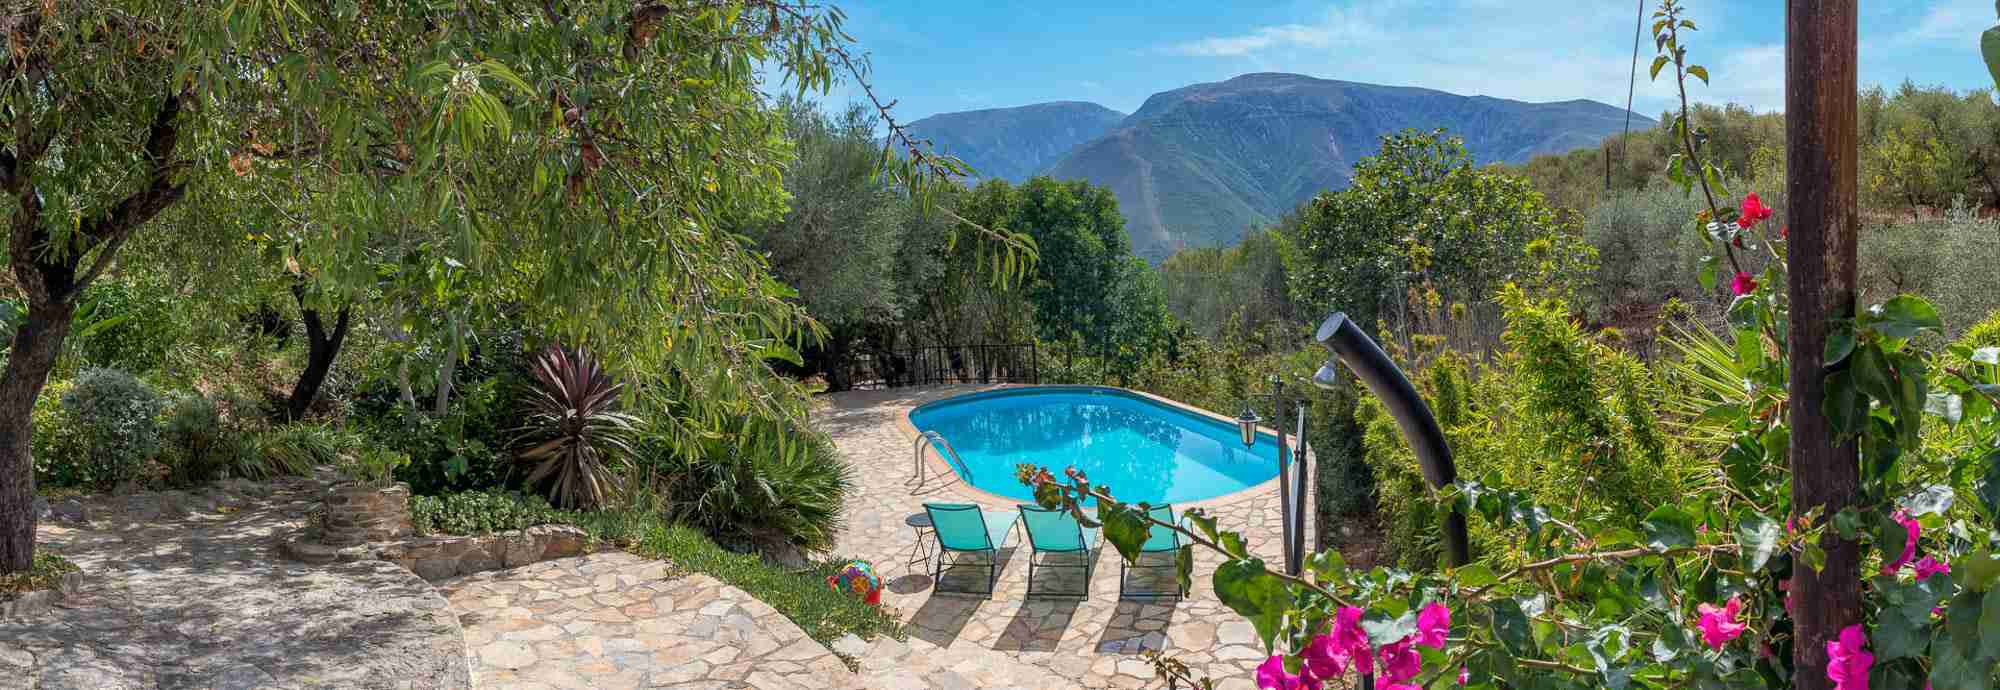 A family cottage for fun in the sun just south from Granada